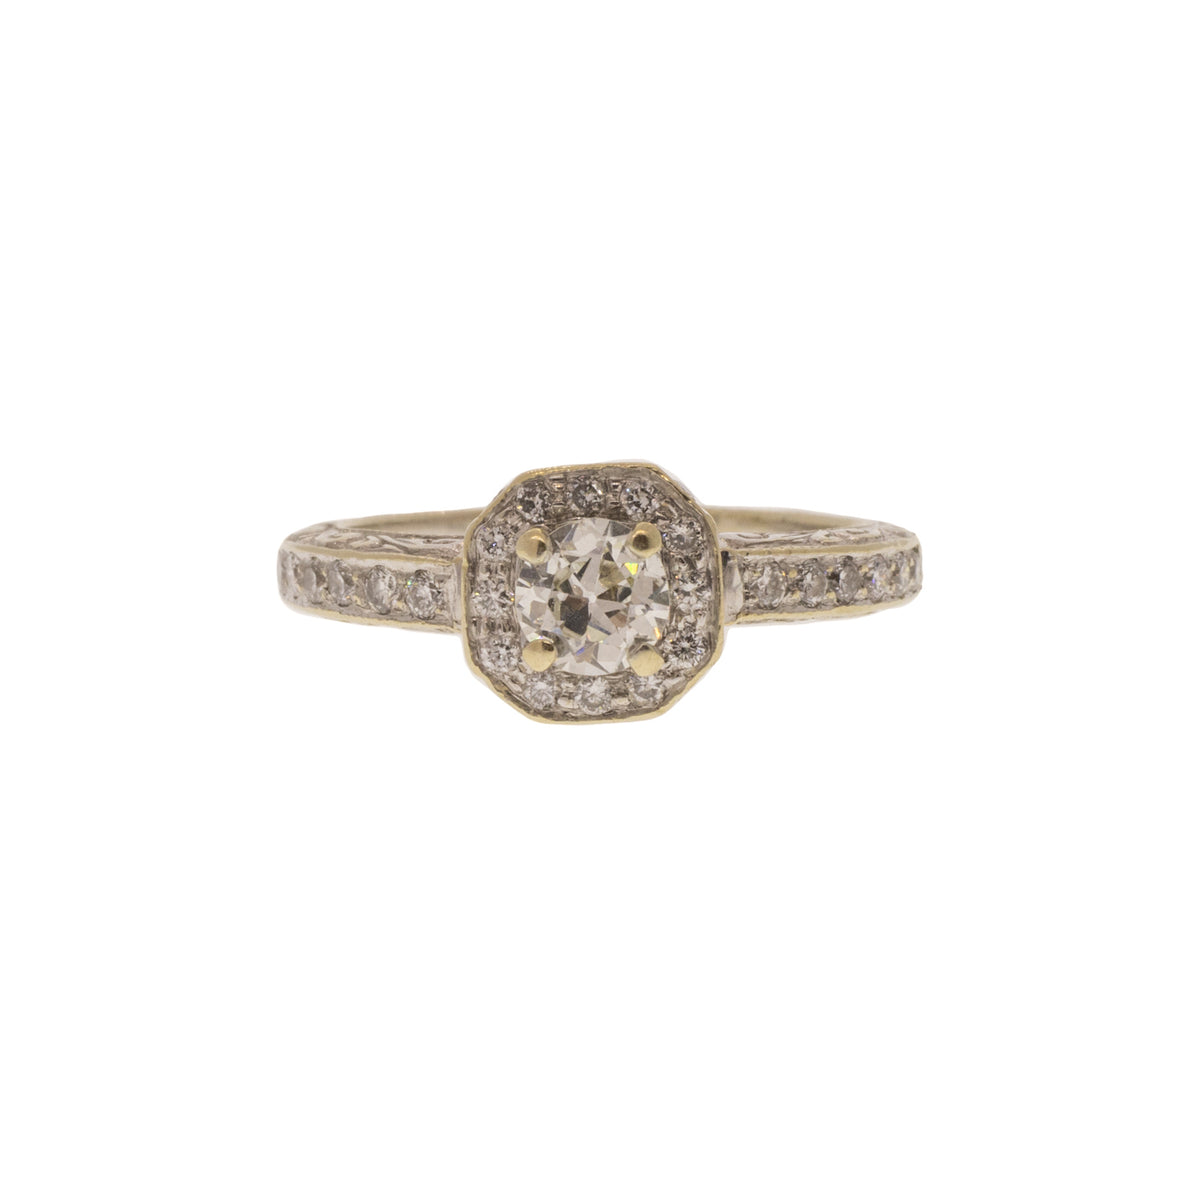 Old European Cut Diamond Ring with Halo